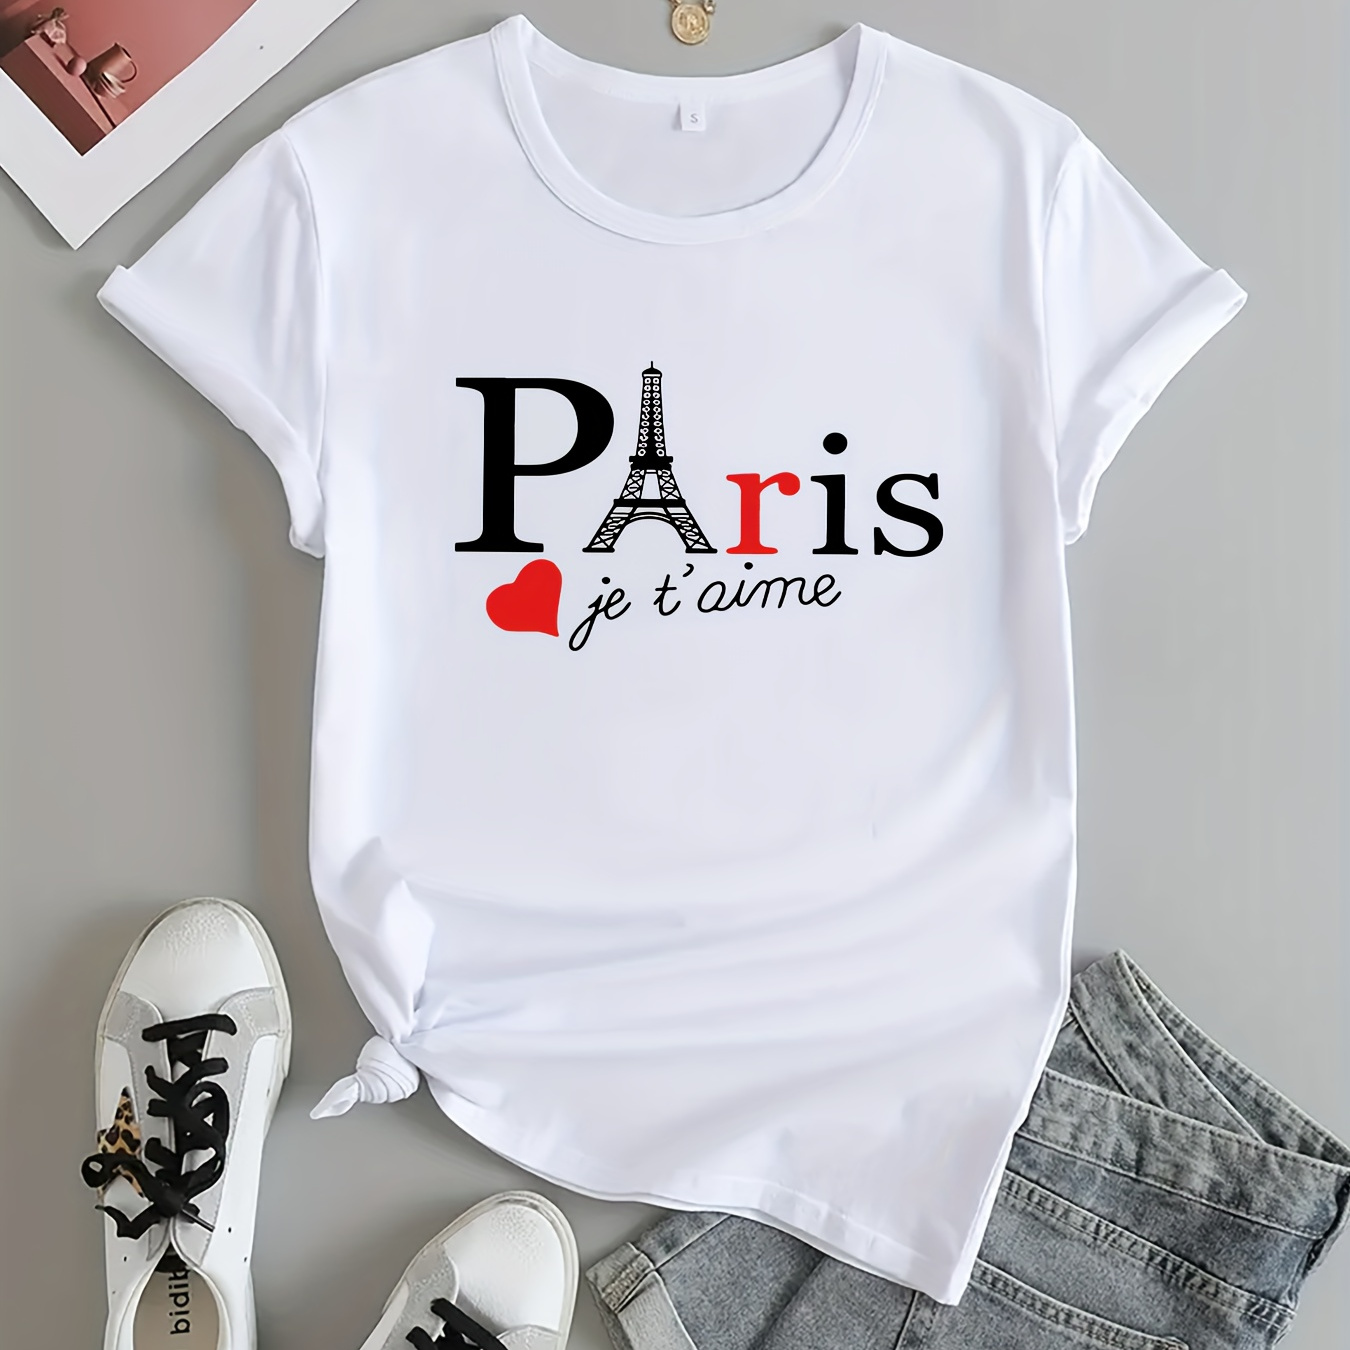 

Paris Graphic Casual Sports T-shirt, Fashion Short Sleeves Running Workout Tops, Women's Activewear